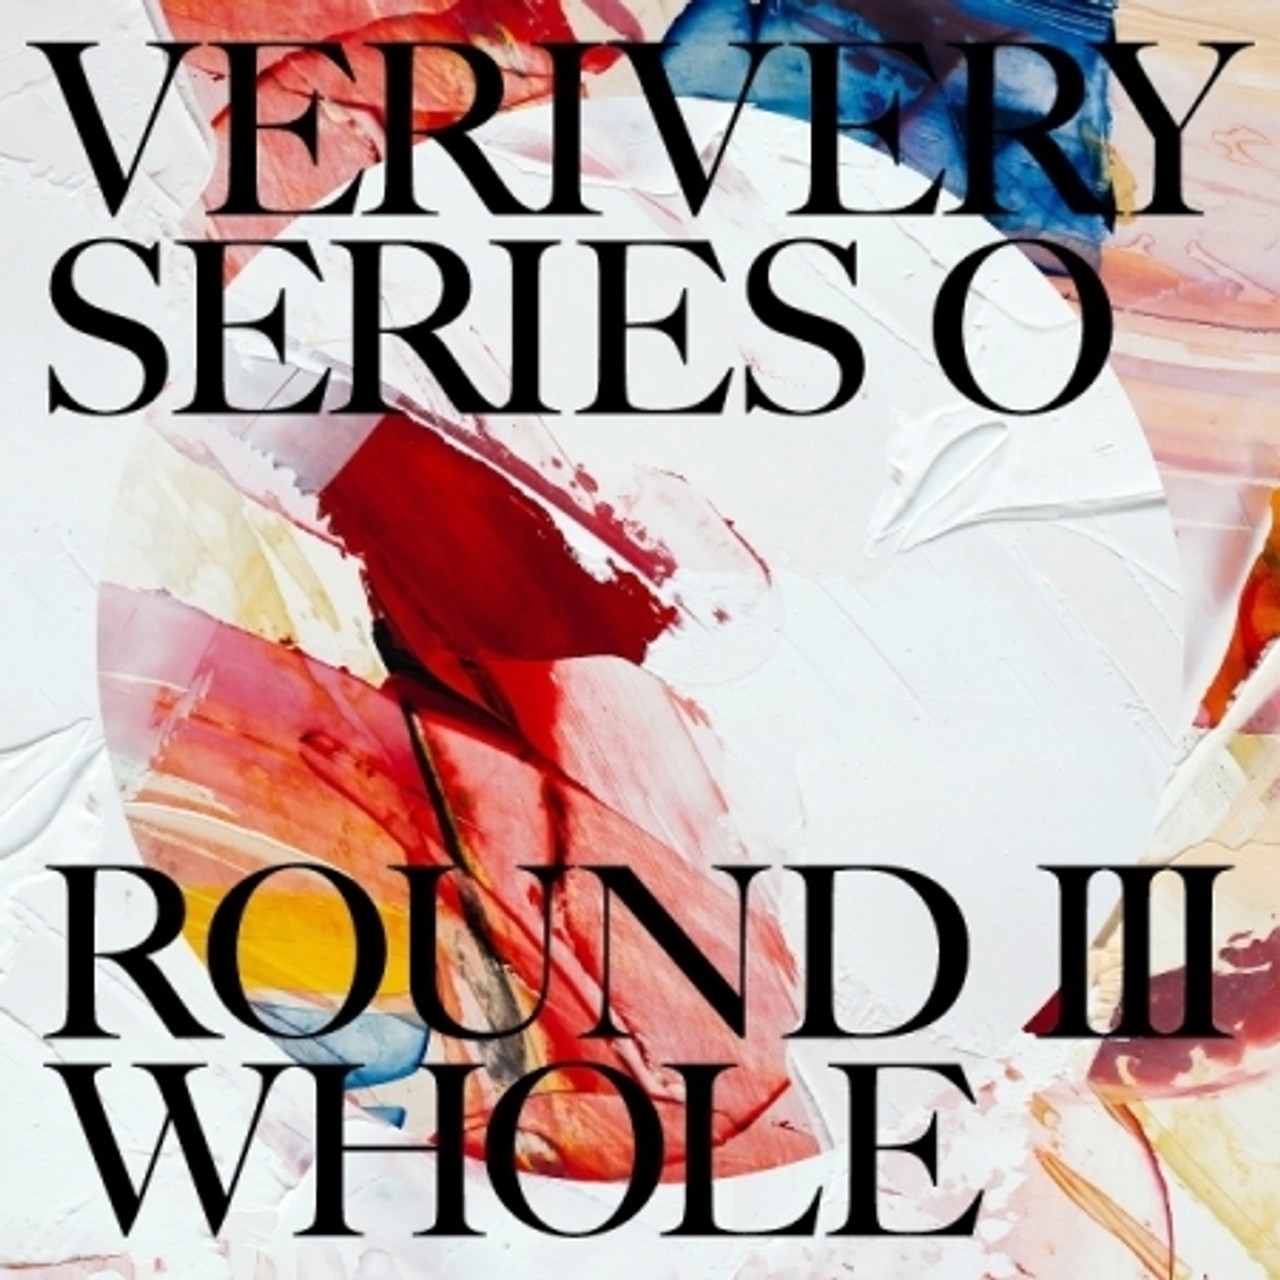 VERIVERY  Vol1  VERIVERY SERIES O  ROUND 3   WHOLE   C ver  and  Poster